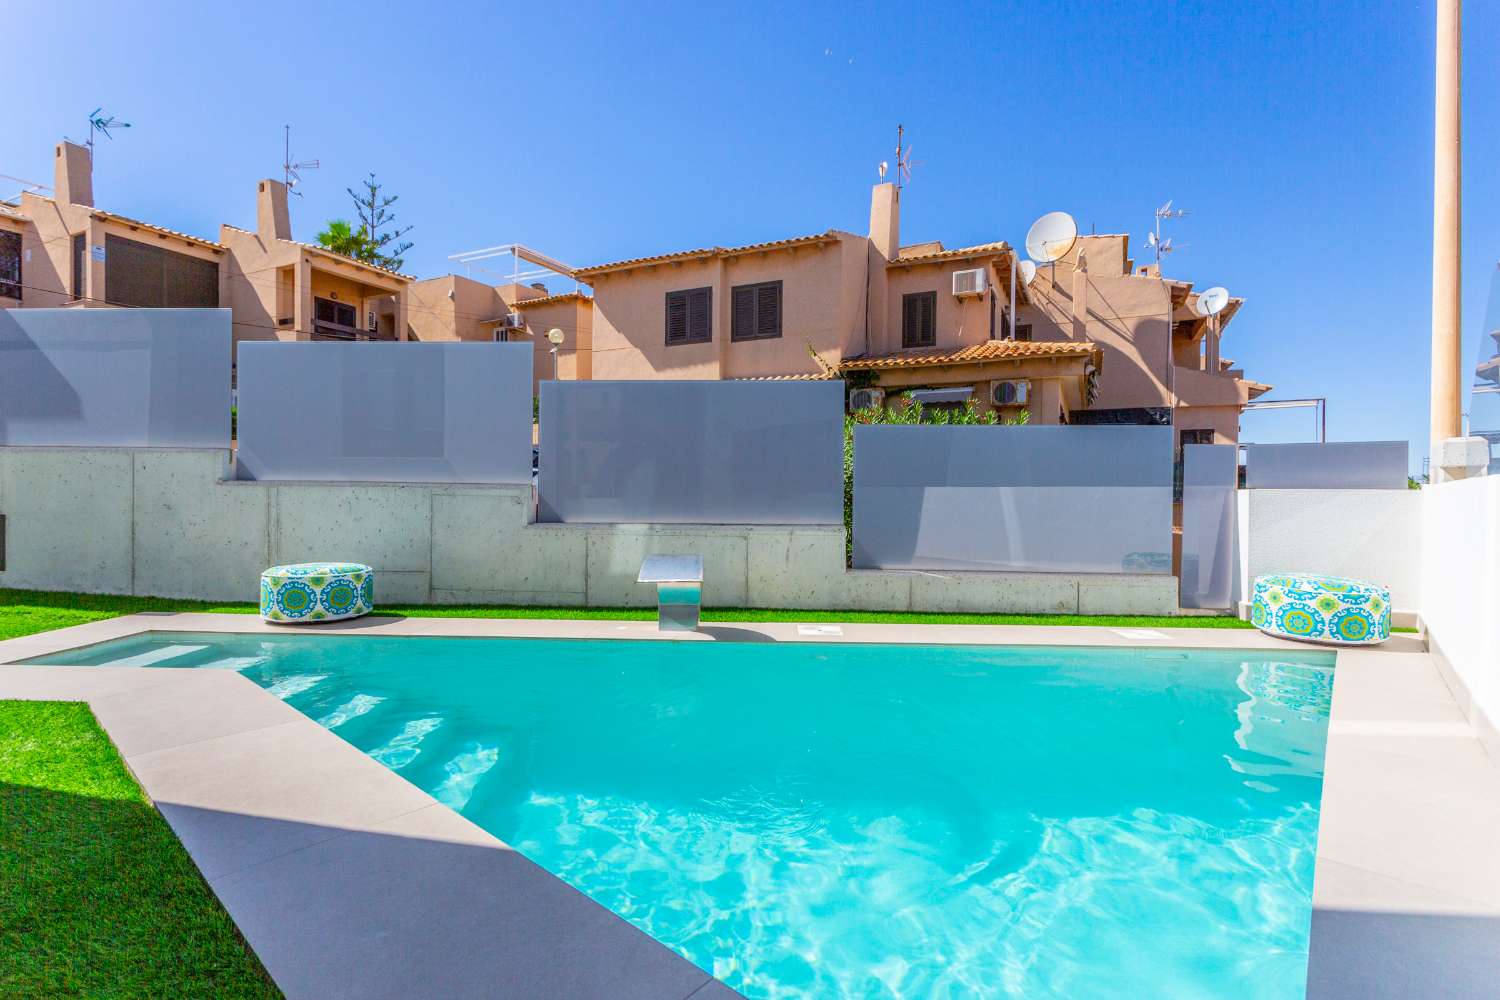 Detached villa 80M from the Sea with private pool and jacuzzi